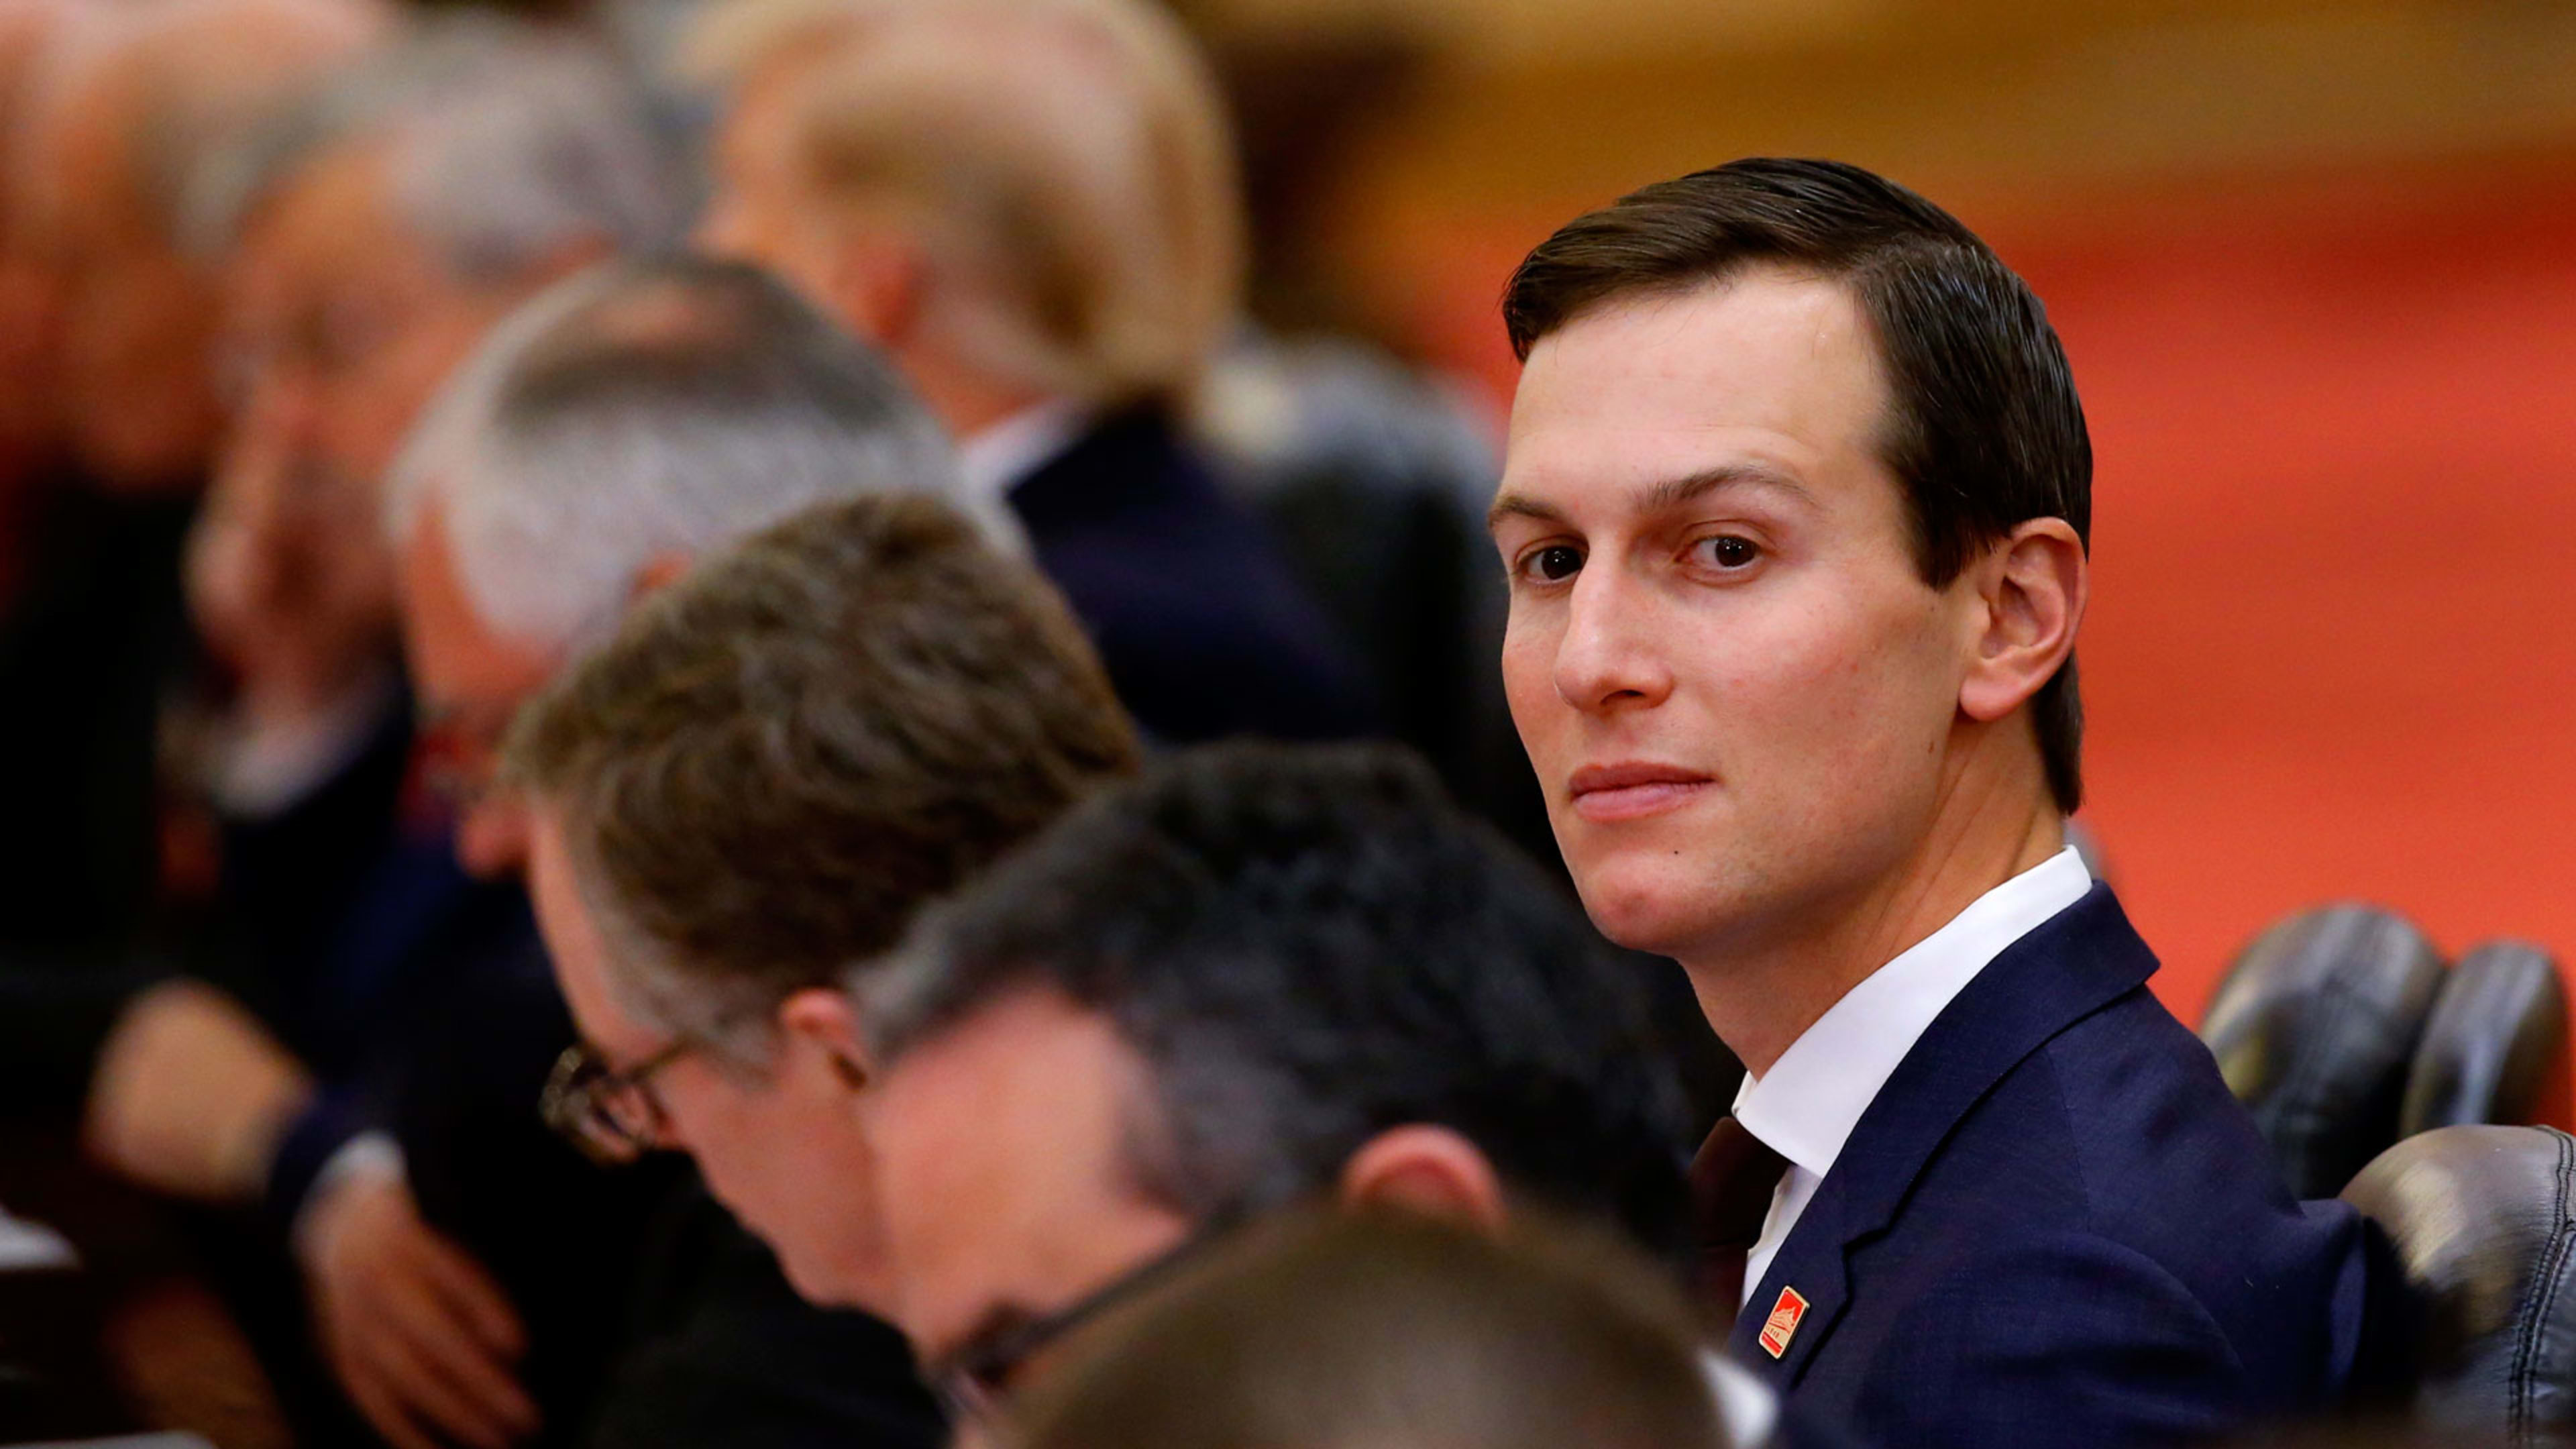 Senators Tell Kushner To Search His Email Again For These Keywords